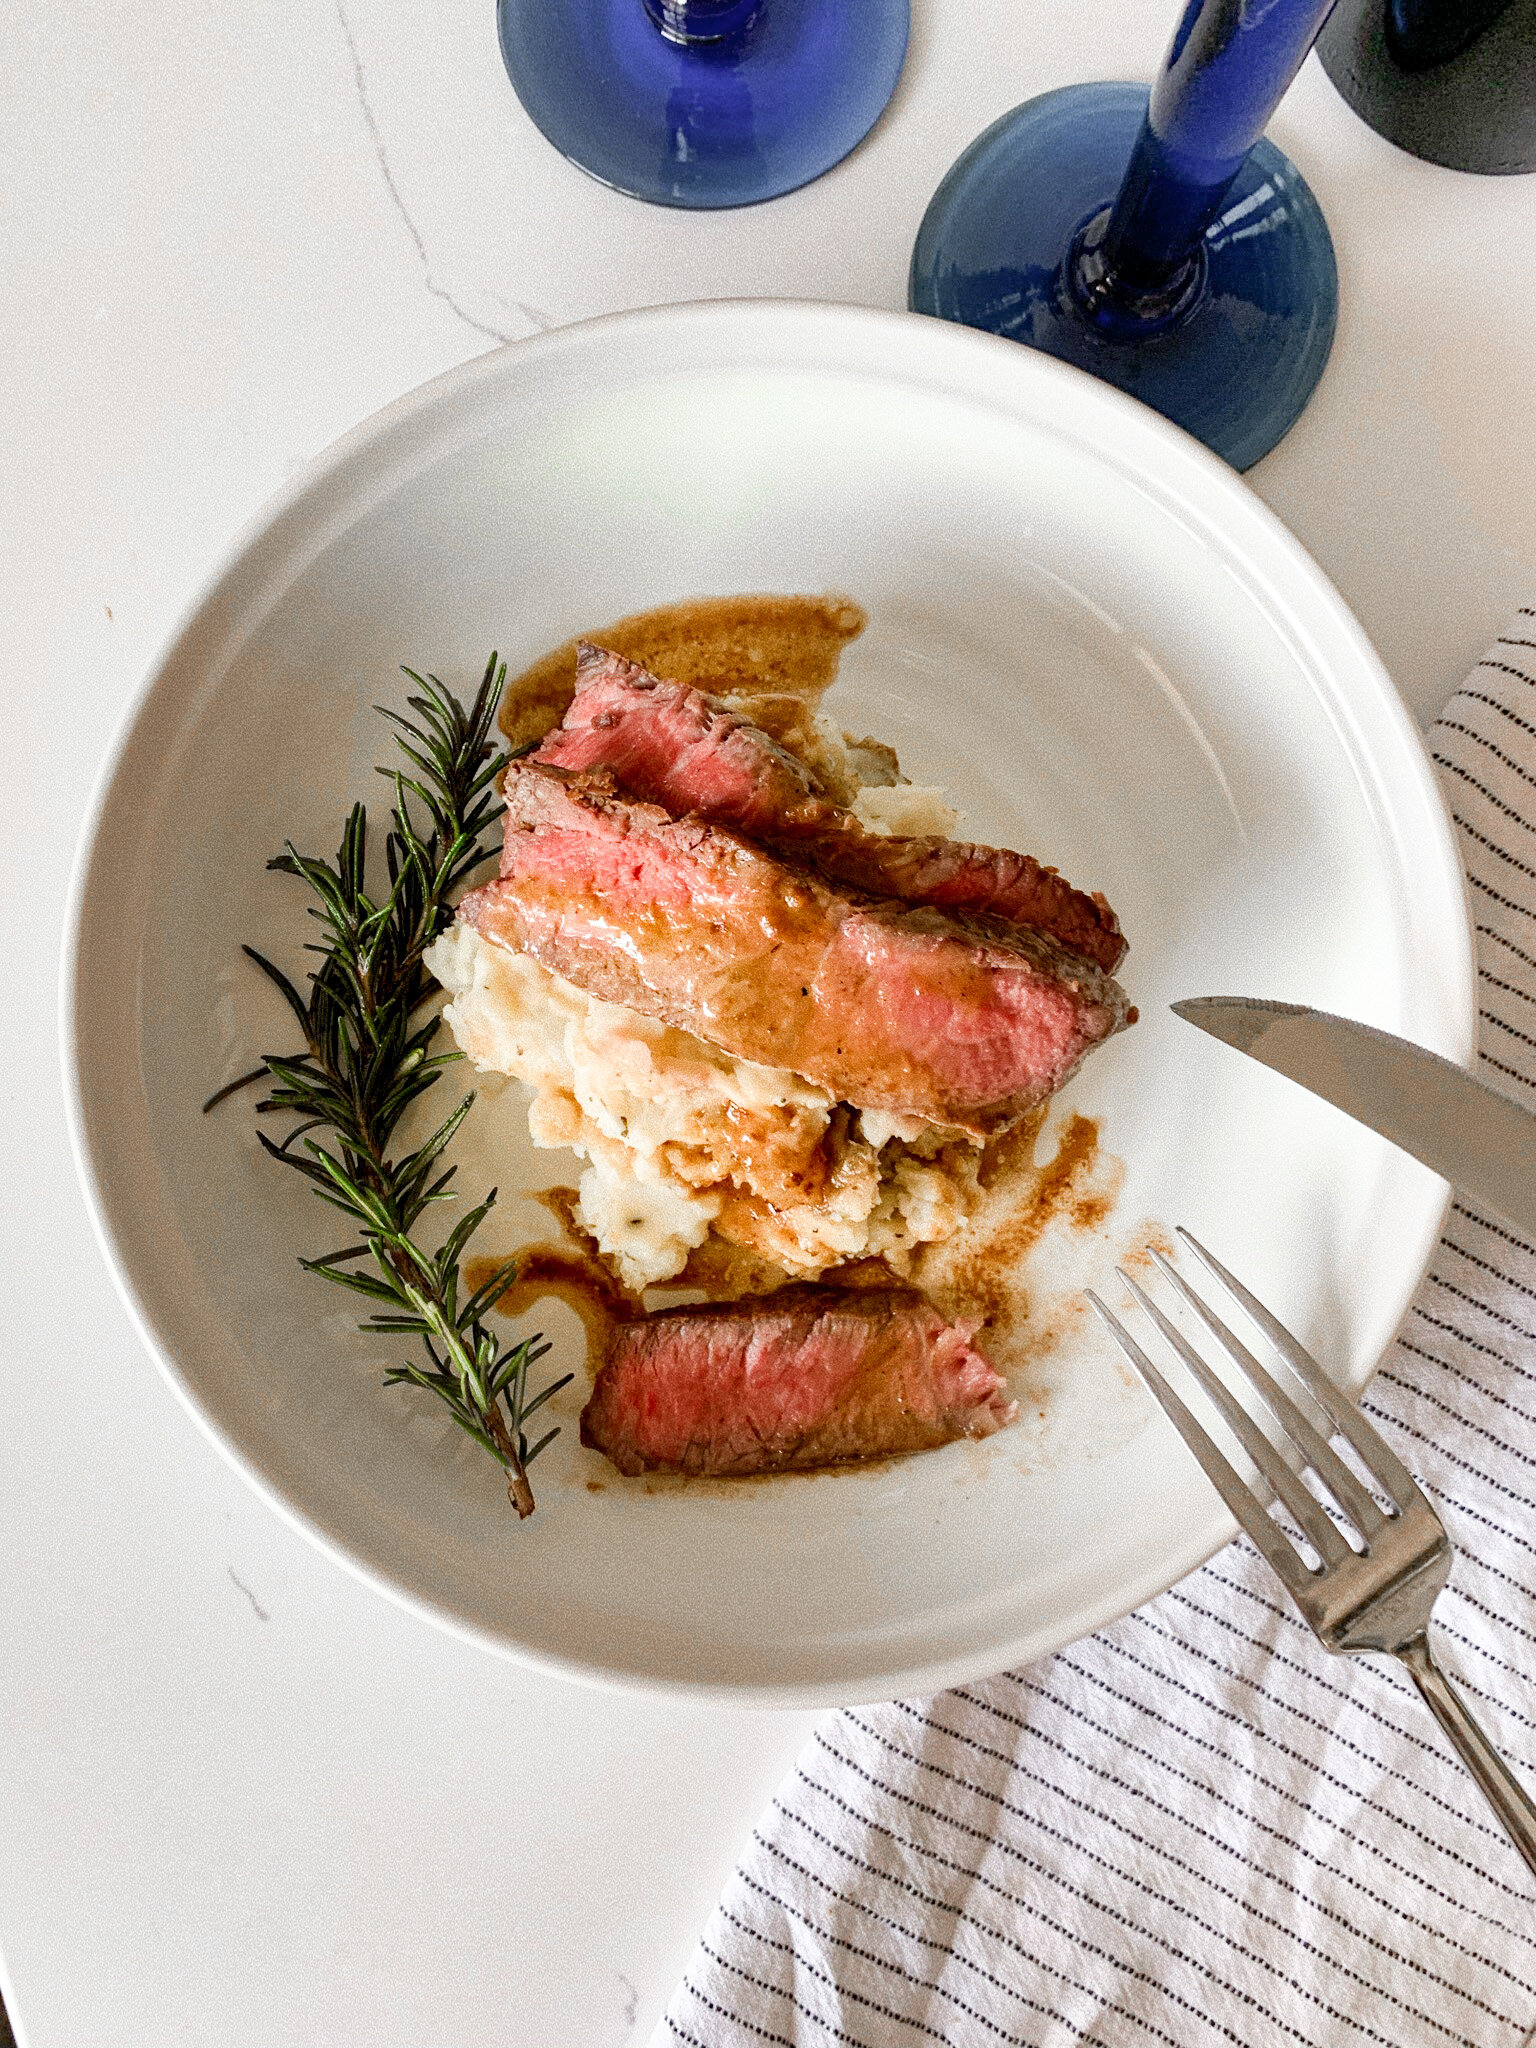 Pan Seared Steak with Garlic & Butter - Chasing The Seasons